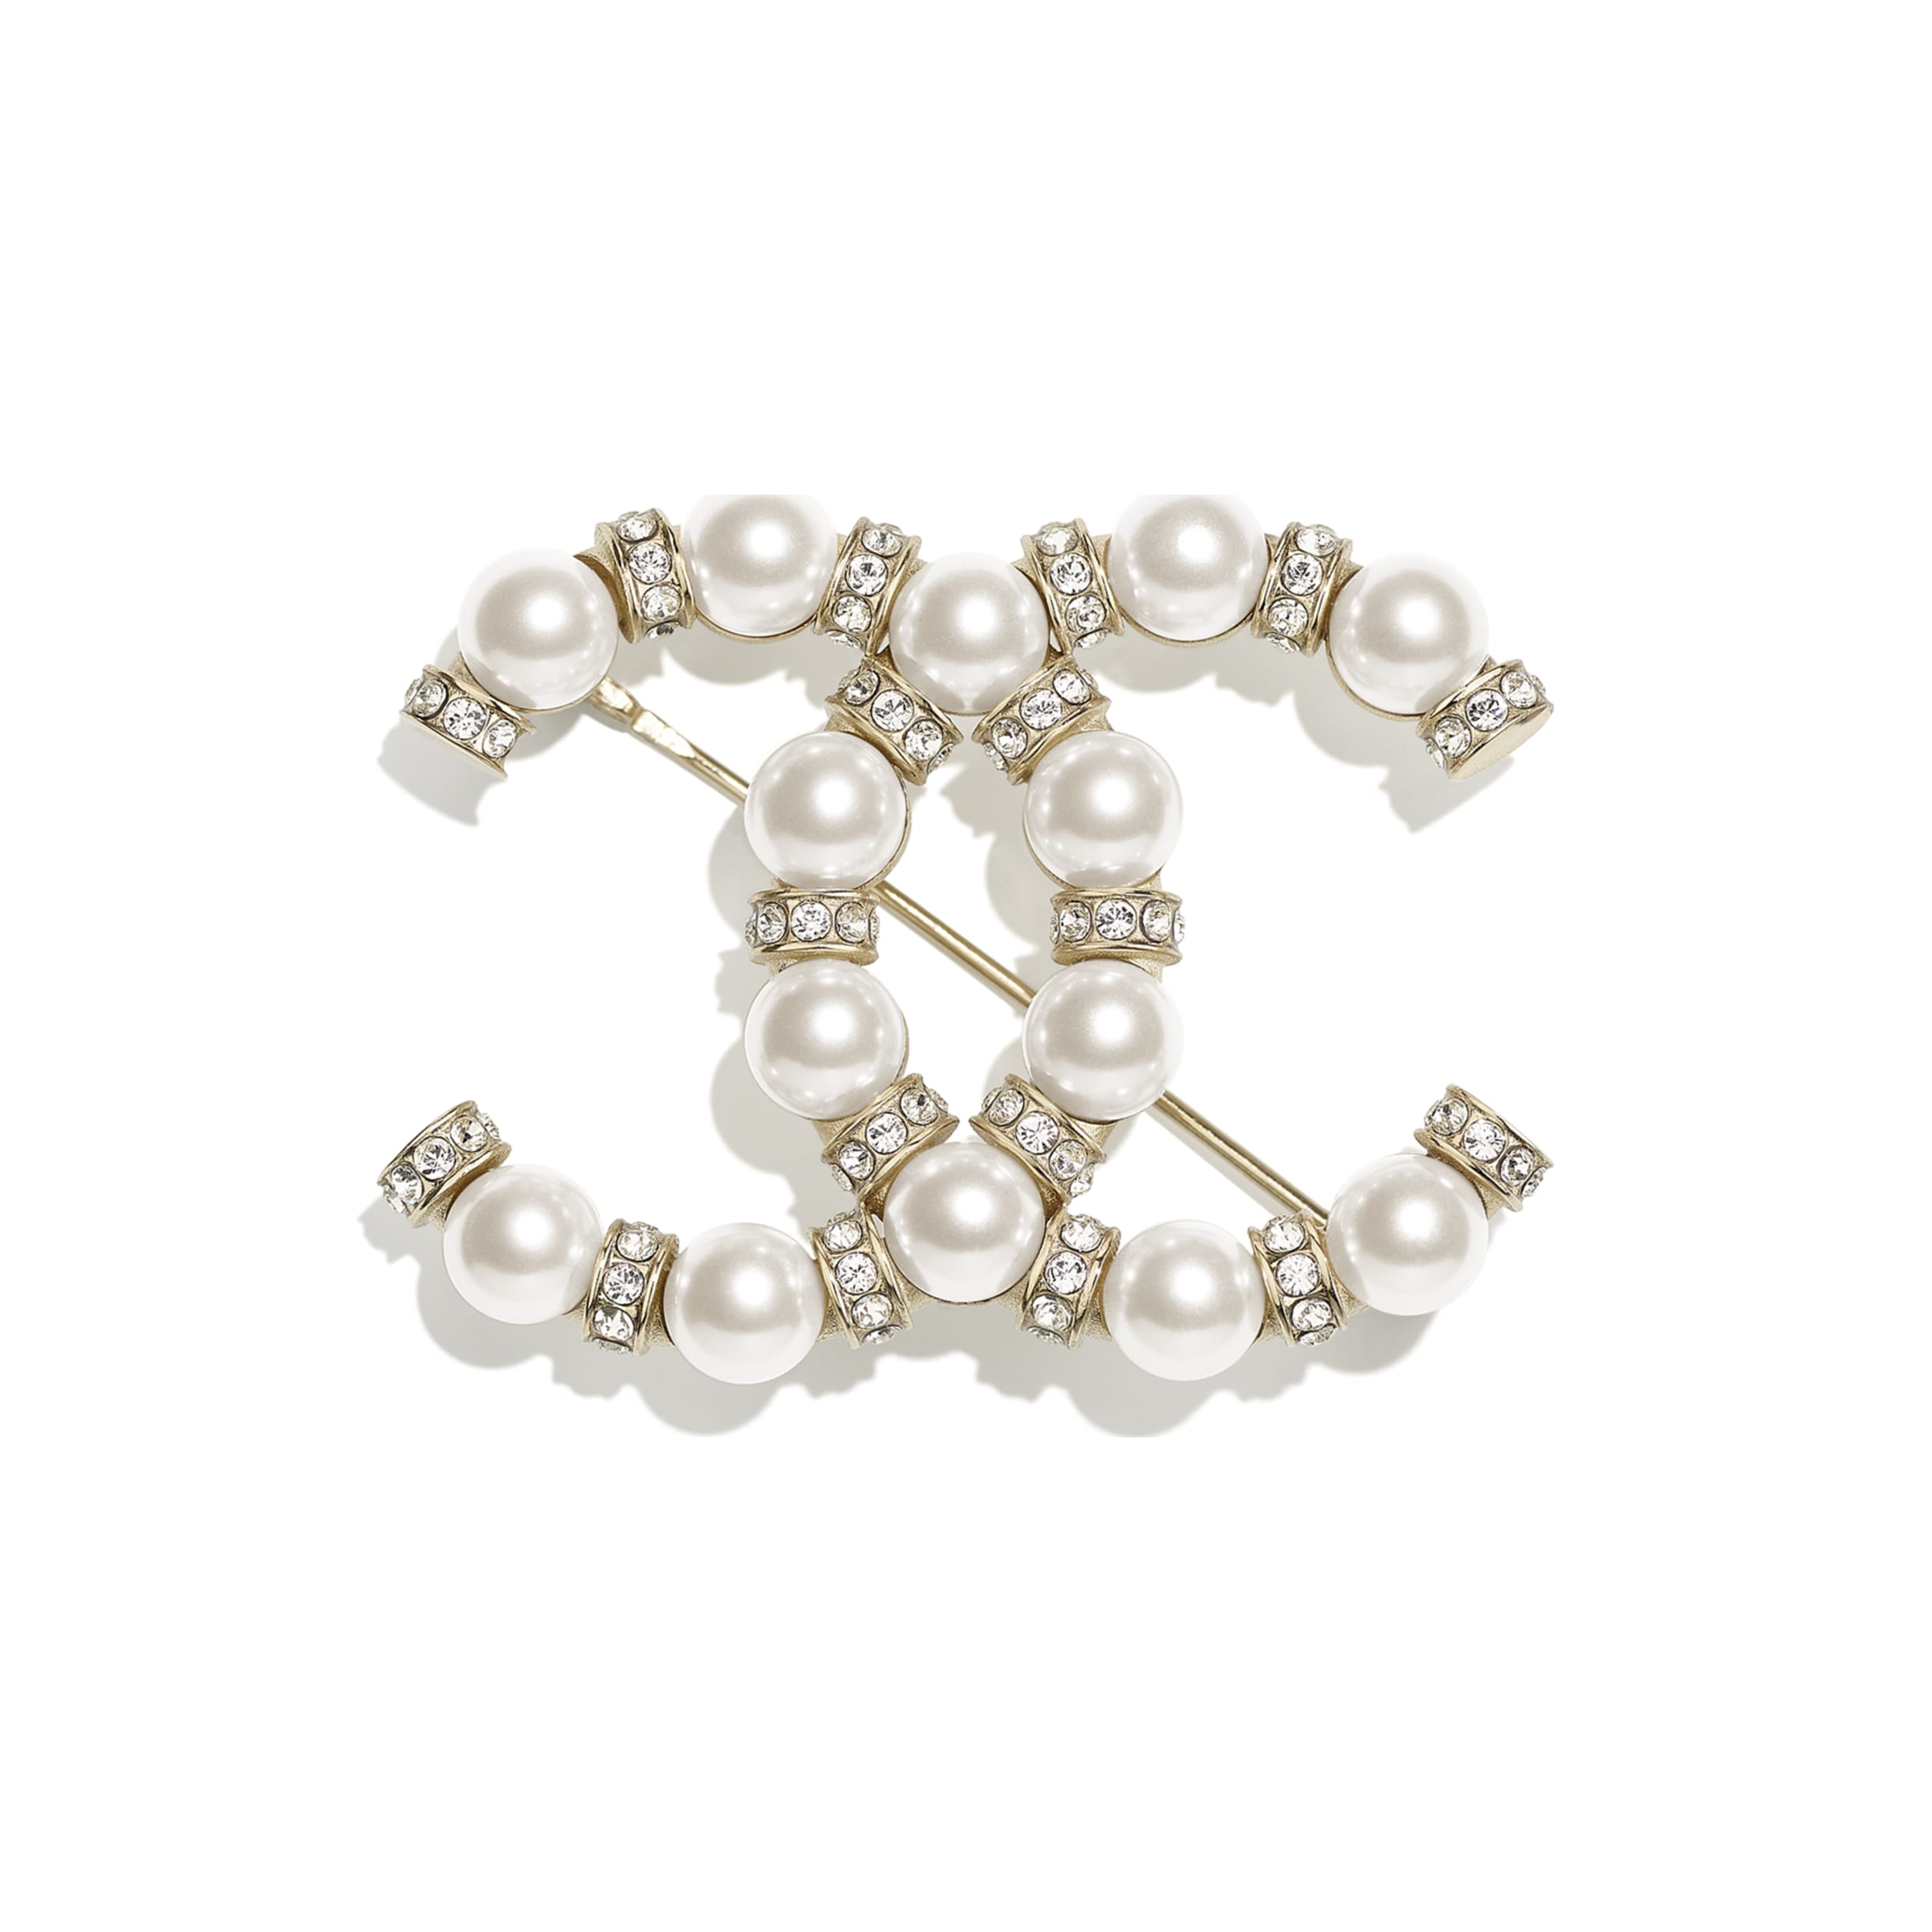 Brooch - Metal, strass & glass pearls, gold, multicolor & pearly white —  Fashion | CHANEL